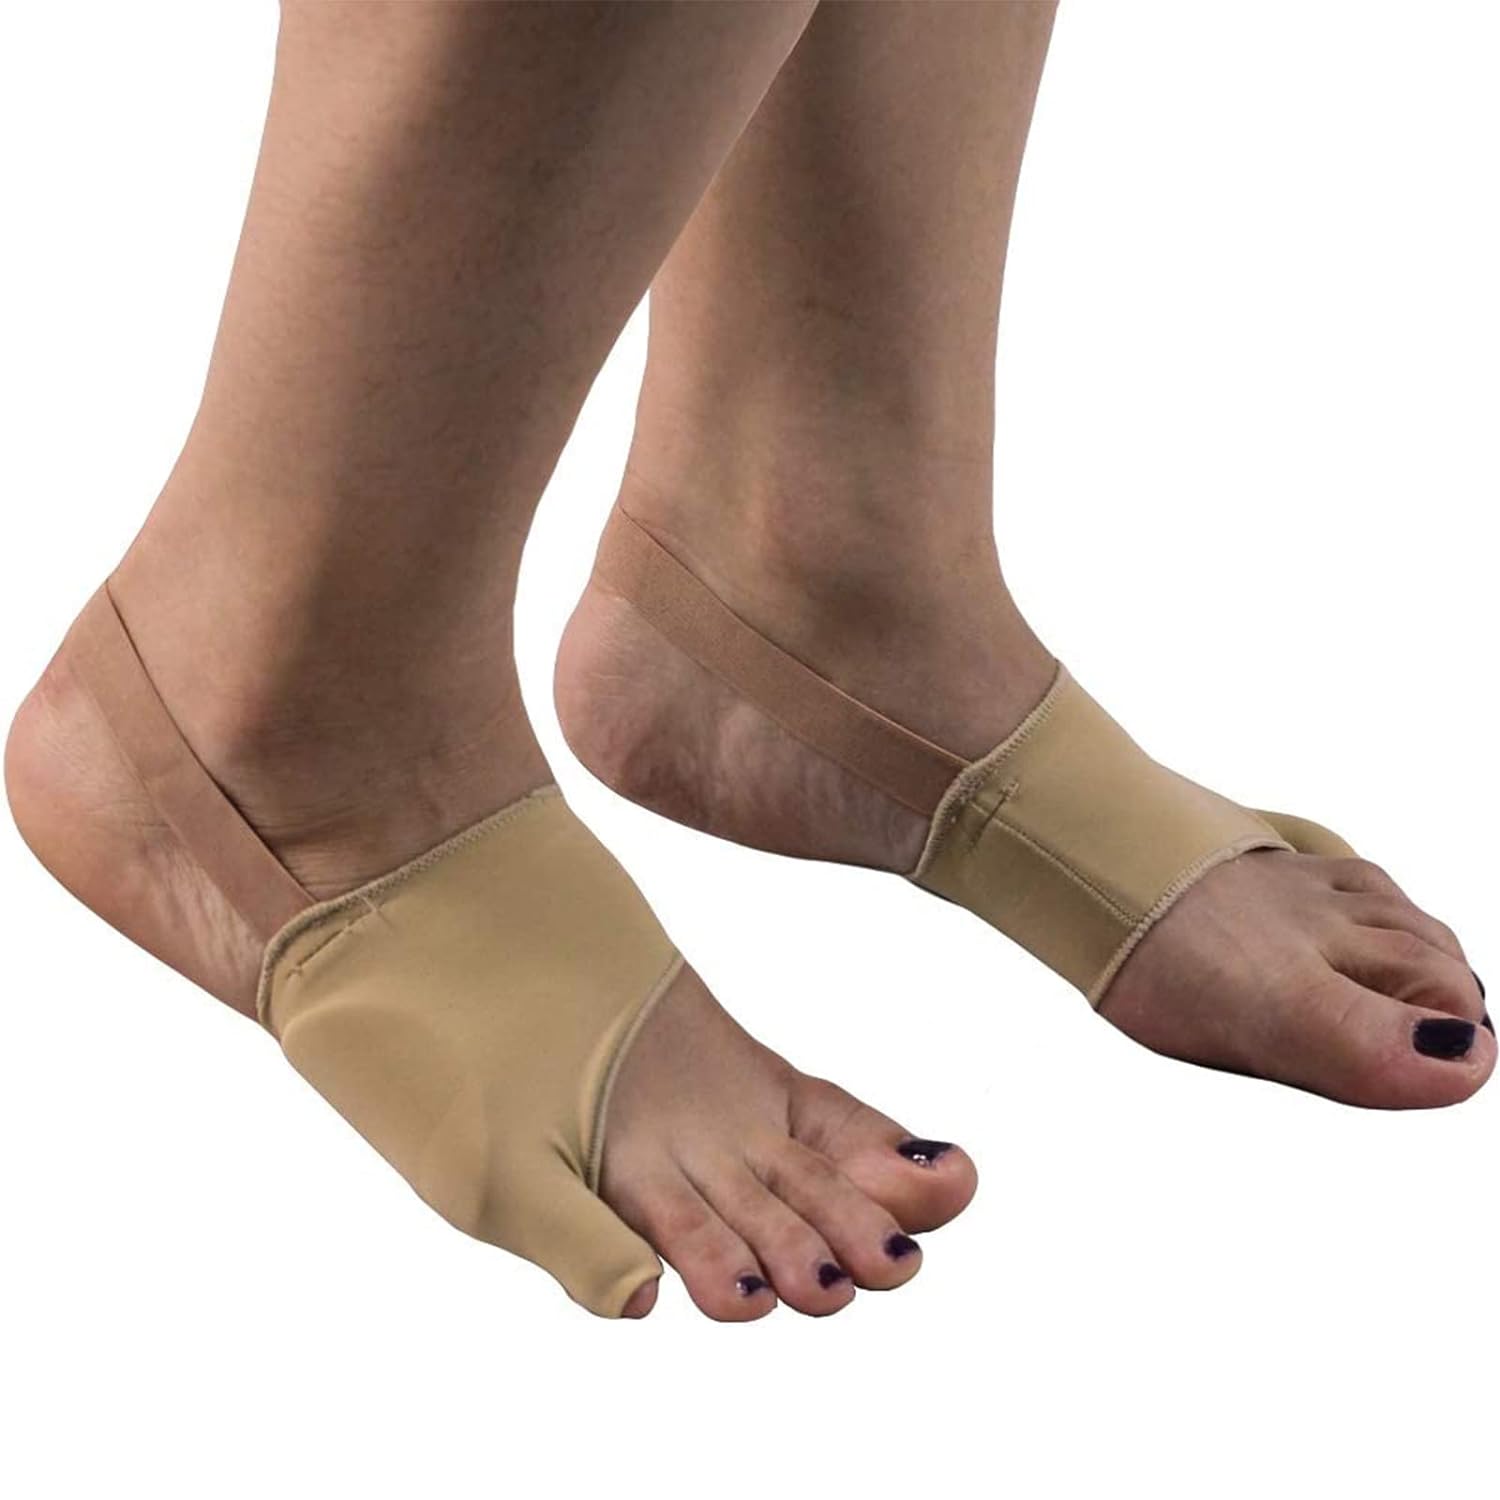 silicon pads for removing bunions